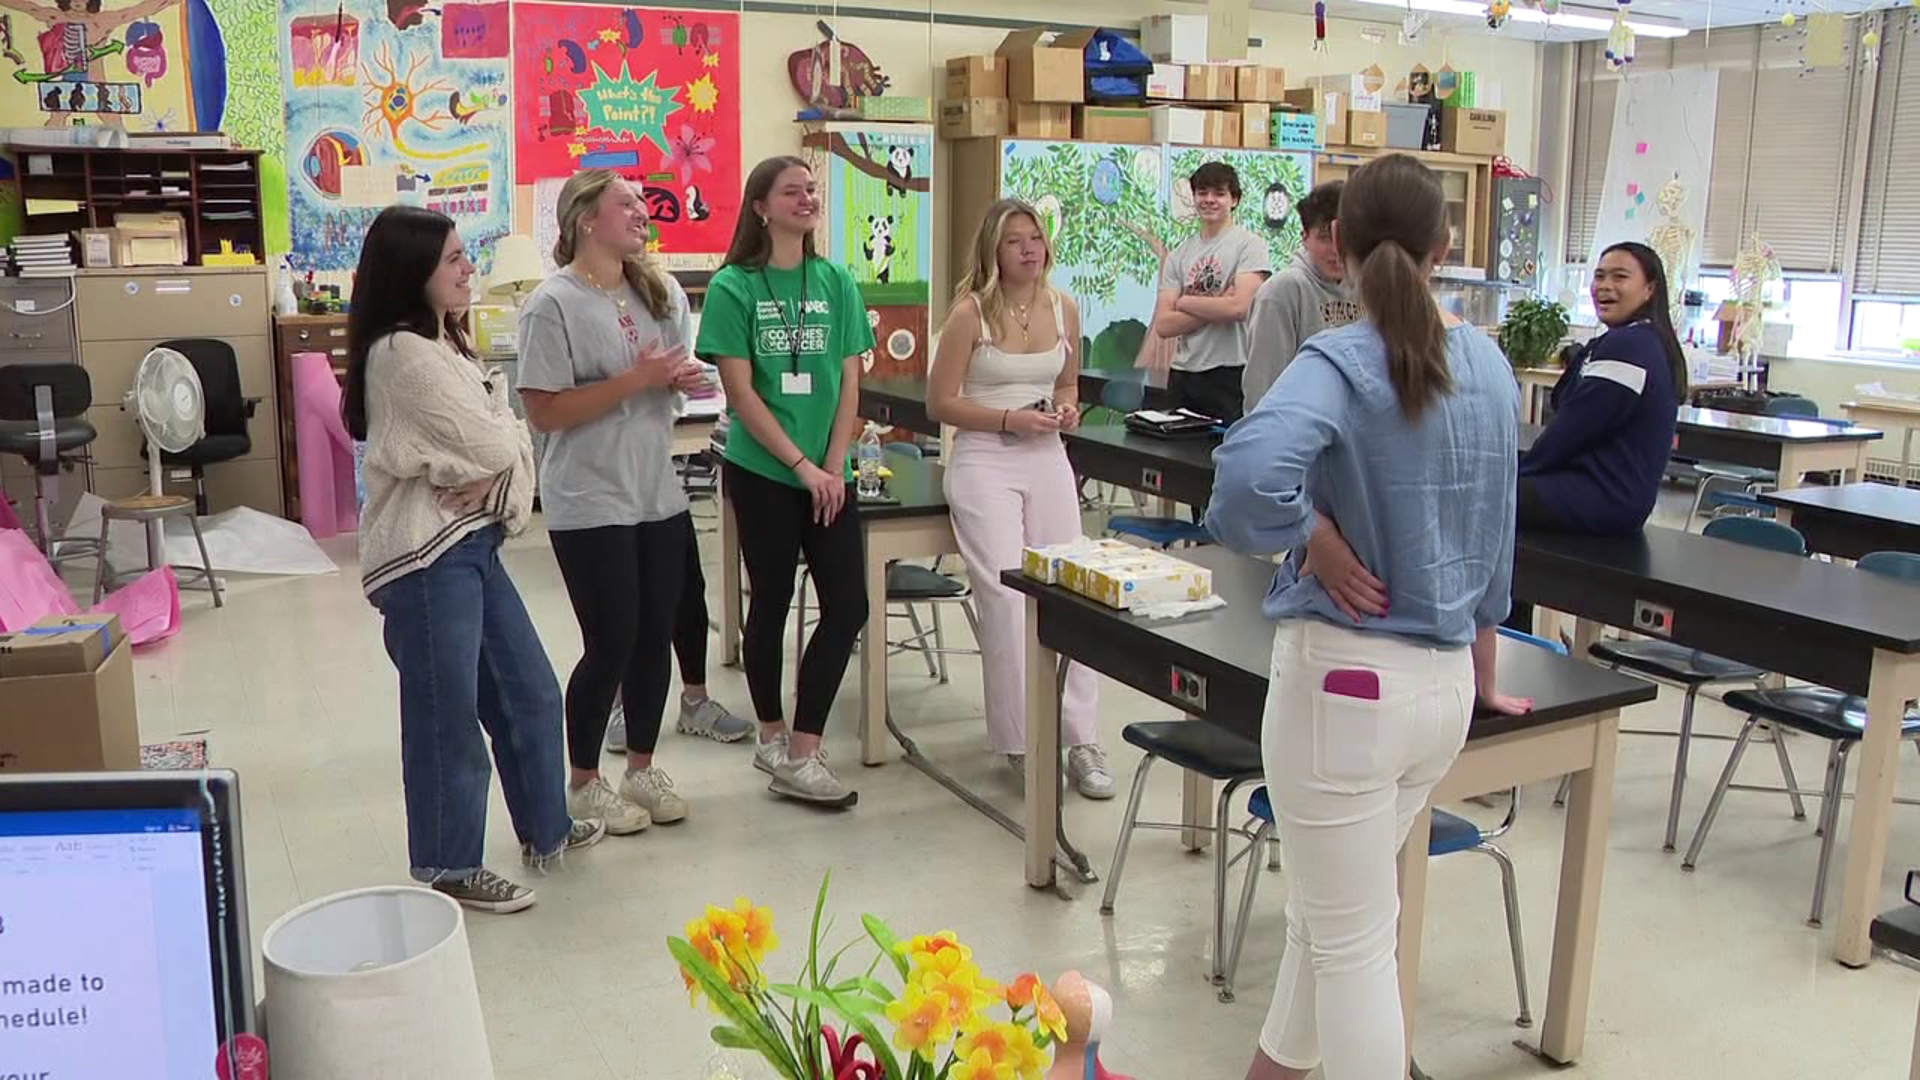 Back in mid-April, this group of students received a lesson they never expected.